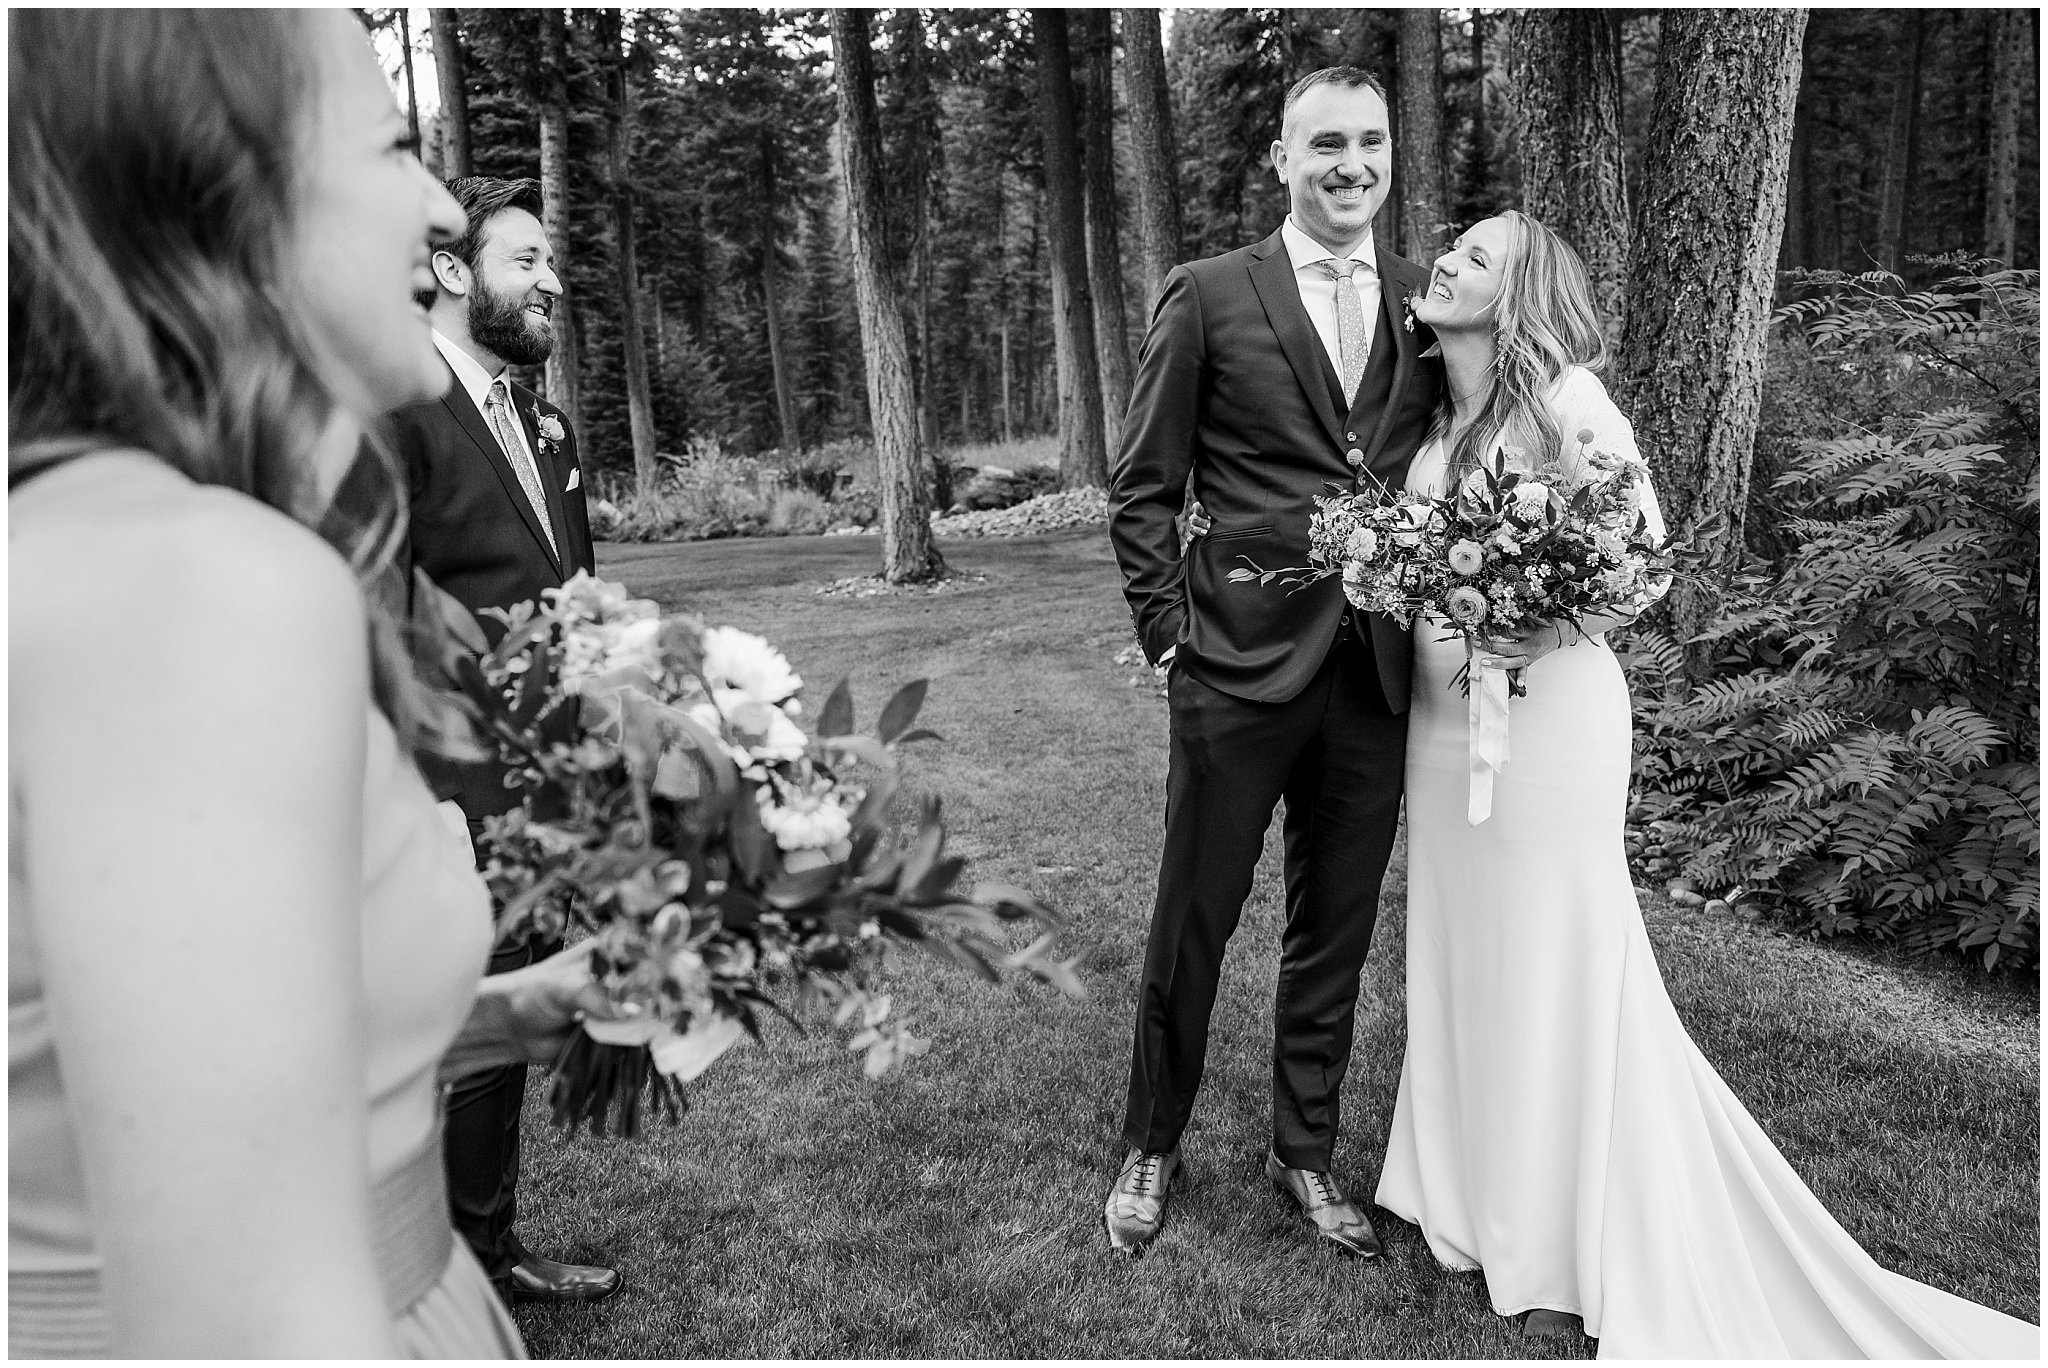 Family and the bride and groom celebrate after ceremony in the Montana forest | Mountainside Weddings Kalispell Montana Destination Wedding | Jessie and Dallin Photography